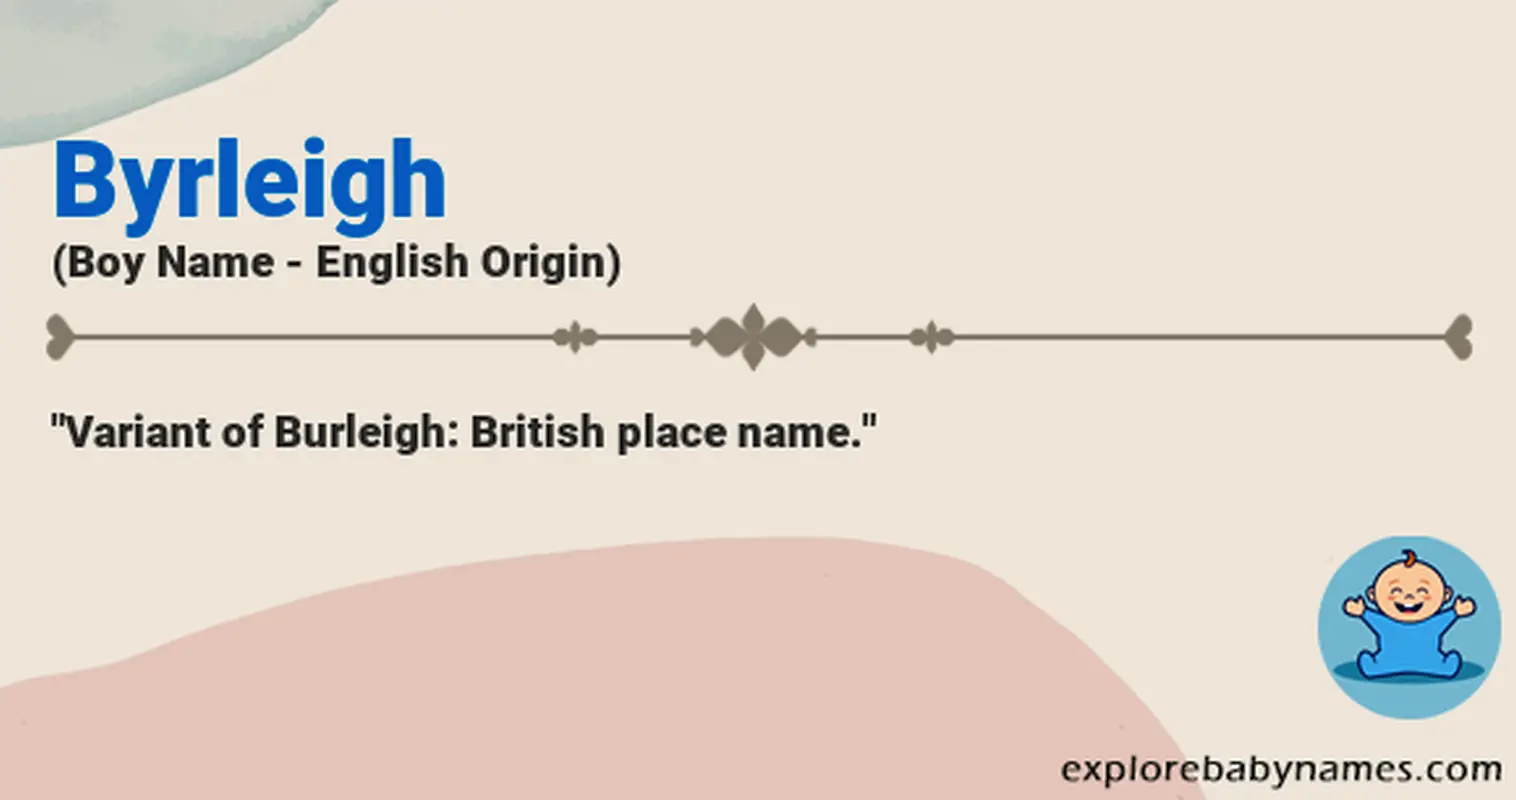 Meaning of Byrleigh